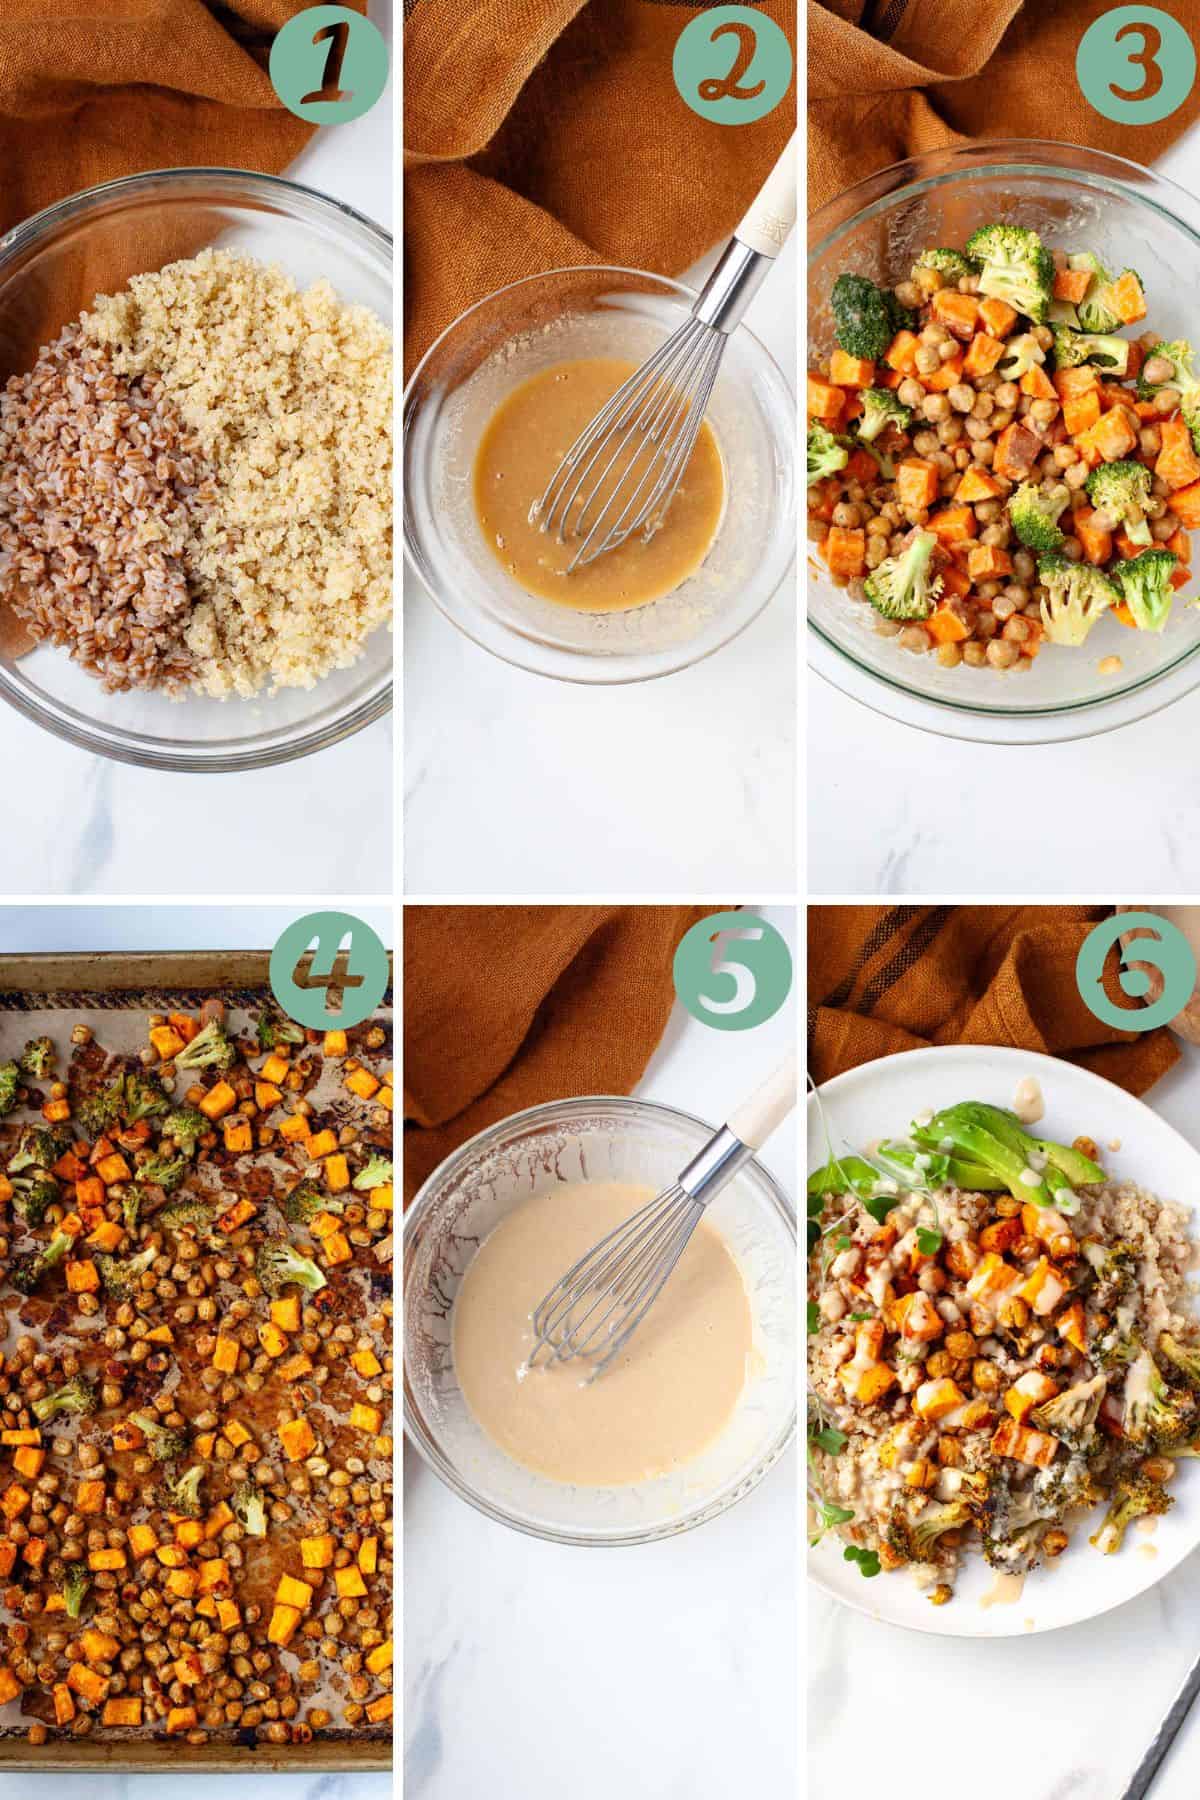 Step-by-step chart of how to make an ancient grains bowl.